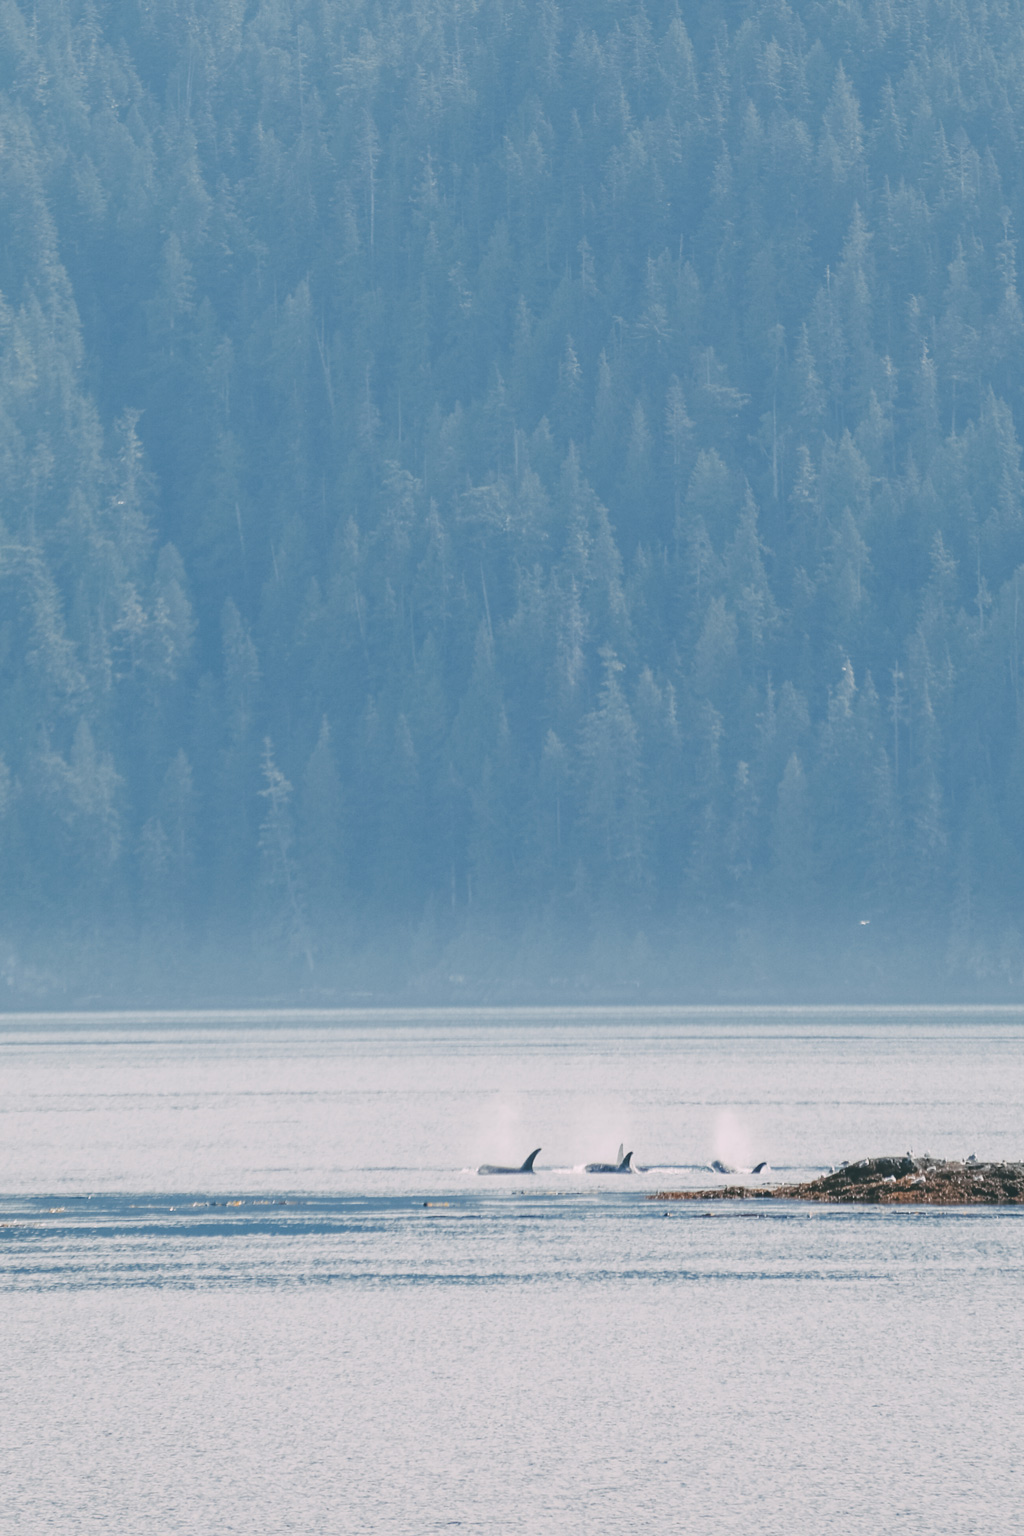 Whale Watching Vancouver Island: Three orca fins stick out of the water.